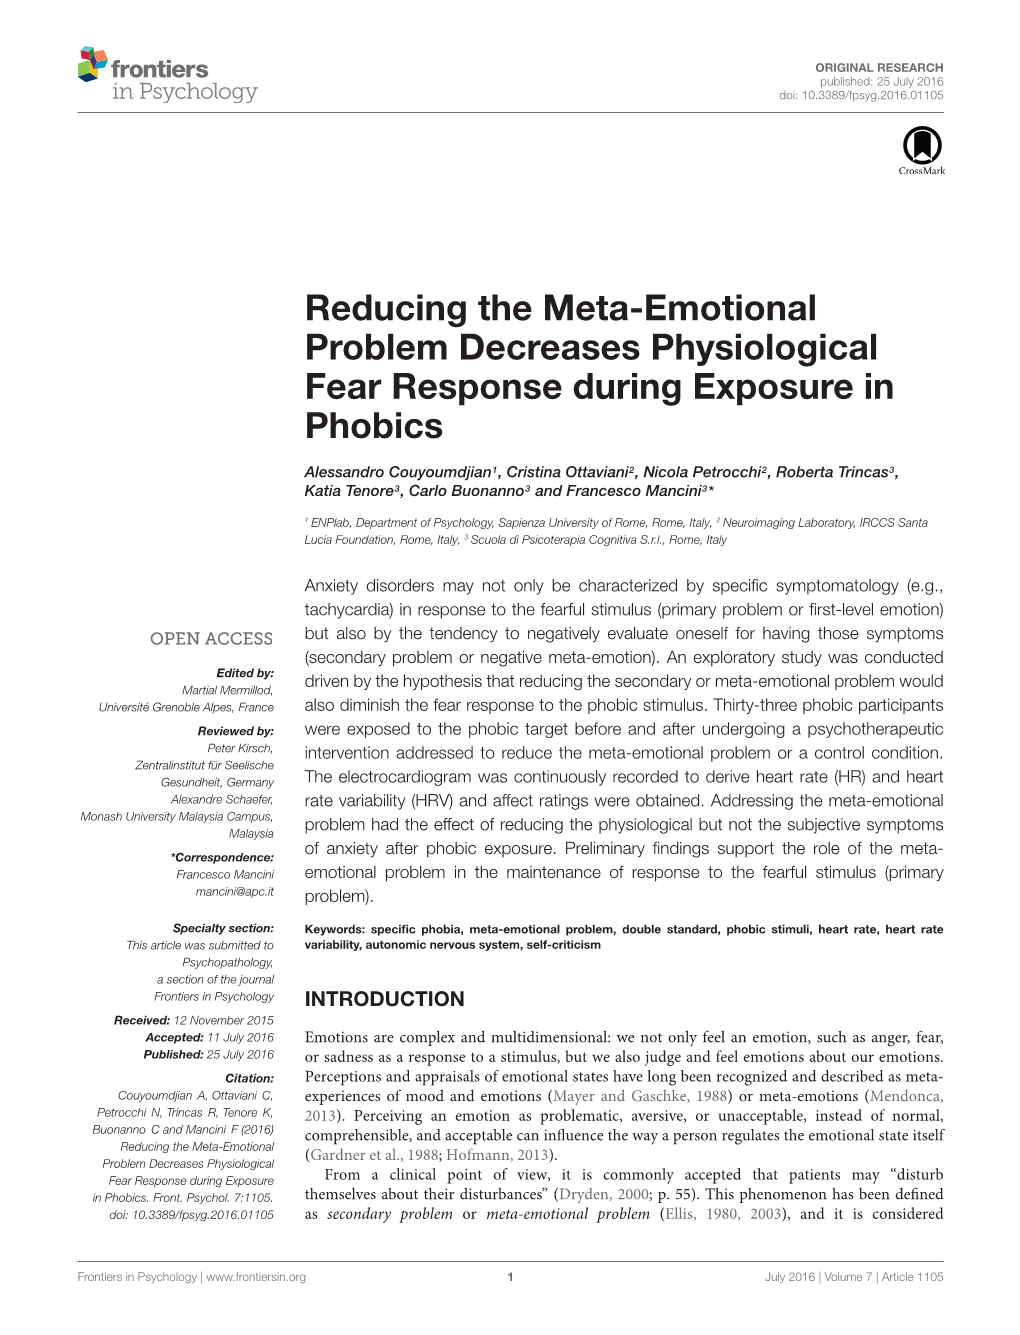 Reducing the Meta-Emotional Problem Decreases Physiological Fear Response During Exposure in Phobics